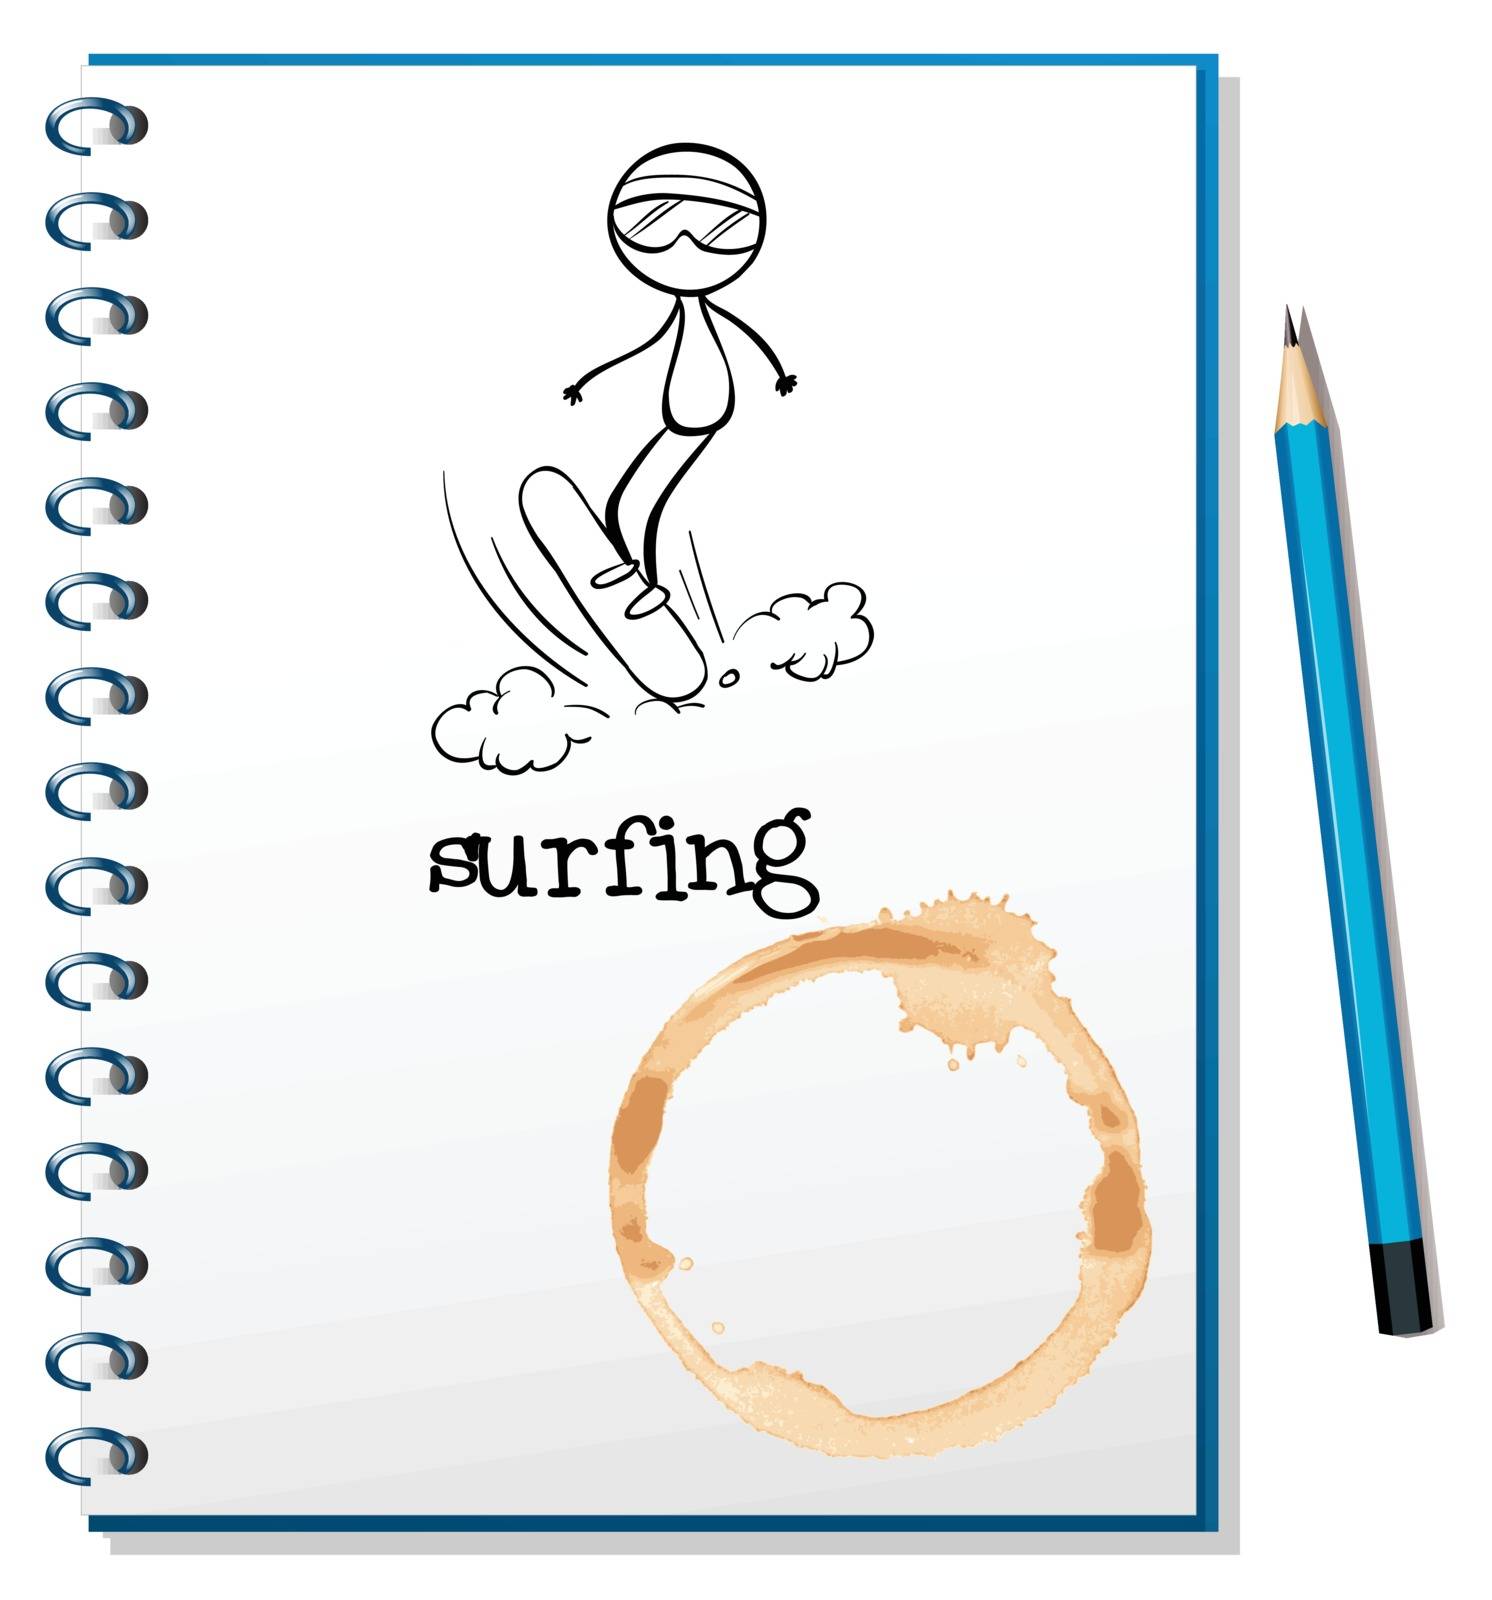 Illustration of a notebook with a sketch of a person surfing on a white background